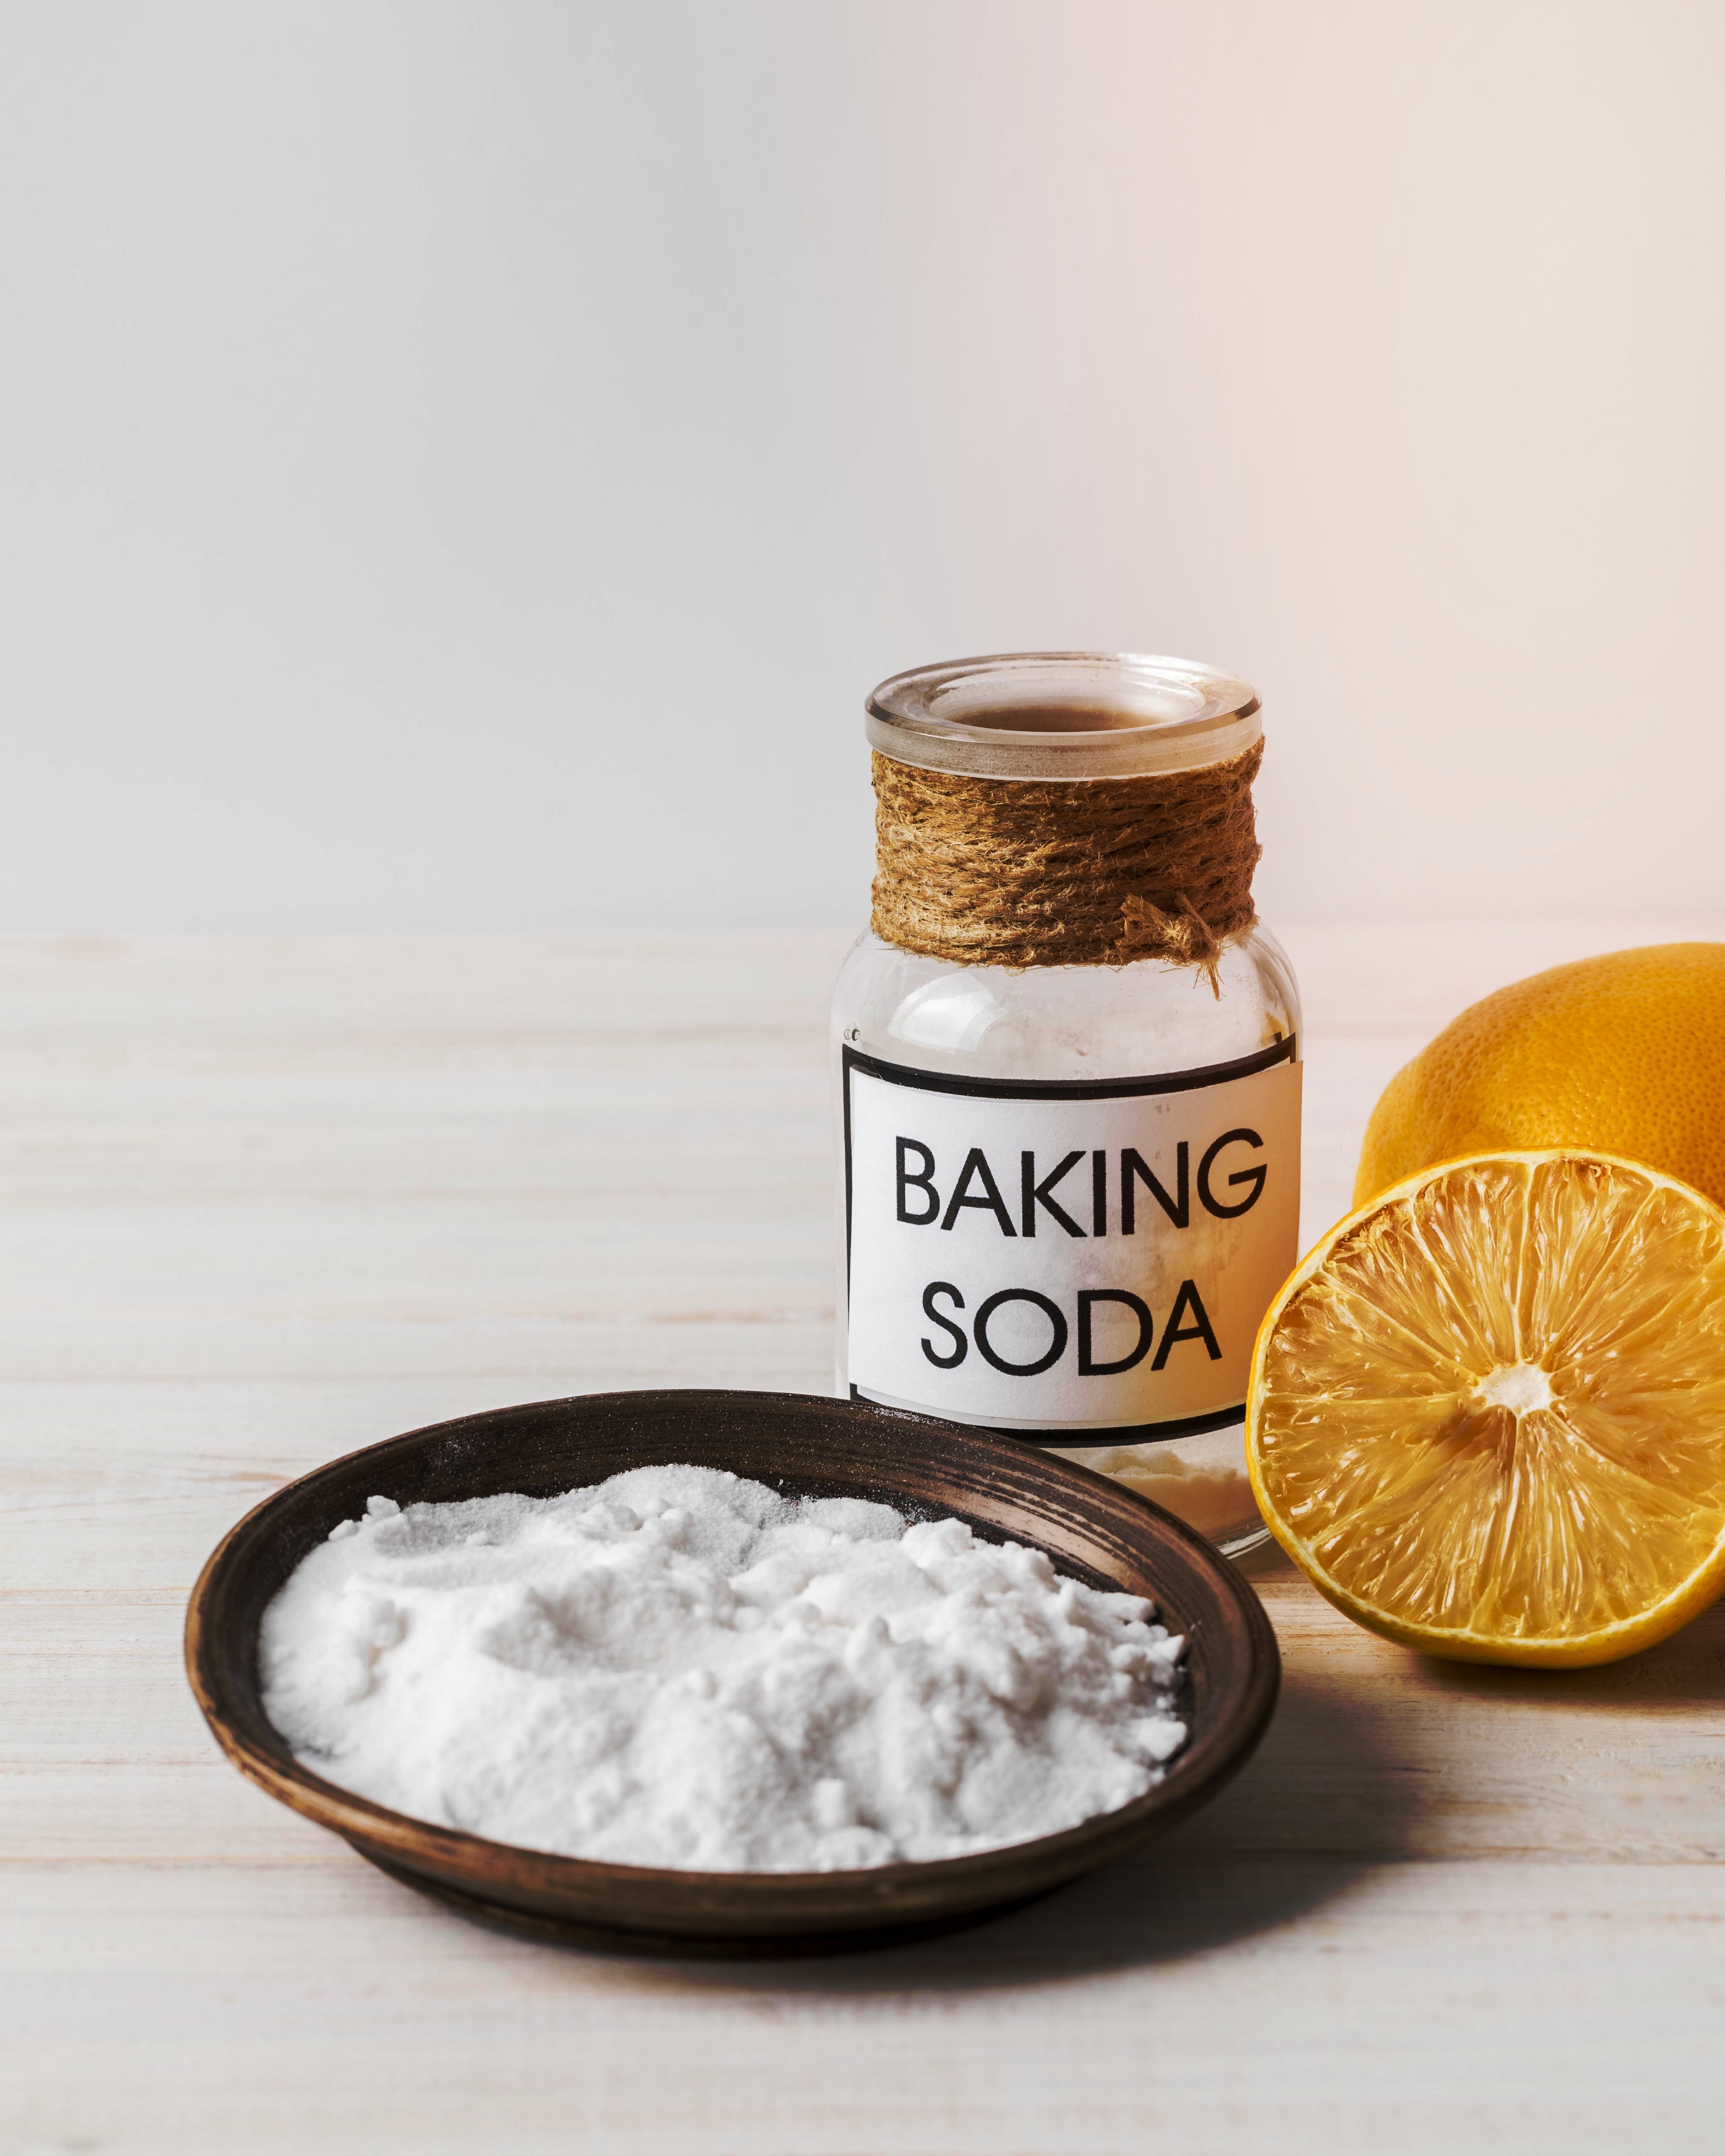 A small bowl of baking soda | Source: Shutterstock